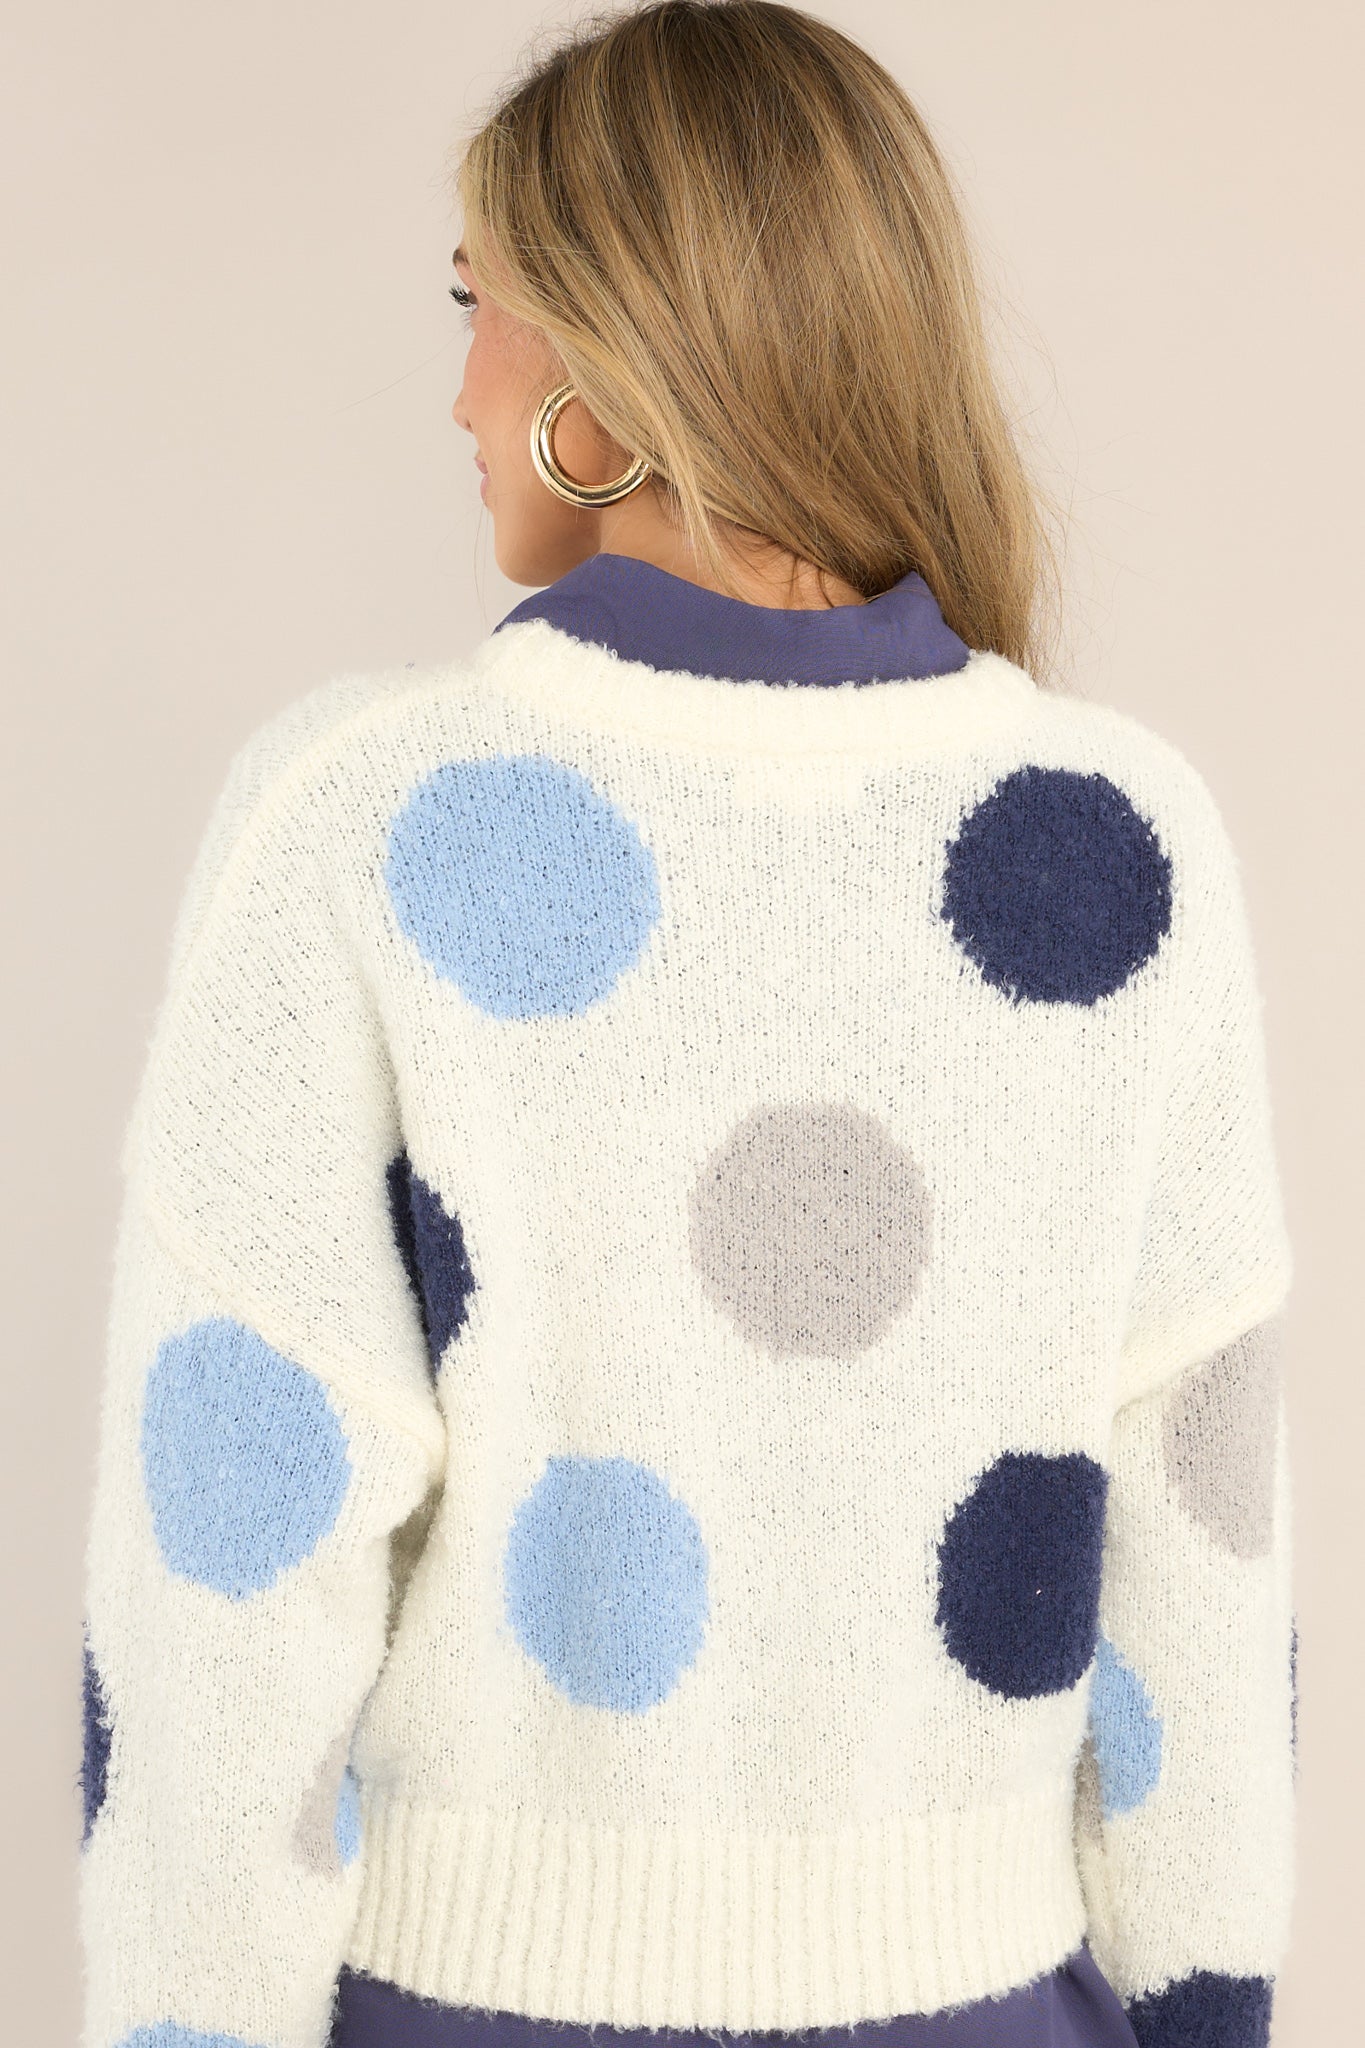 Back view of this sweater that features a crew neckline, dropped shoulders, a blue polka dot design, ribbed cuffed sleeves and a ribbed hemline.